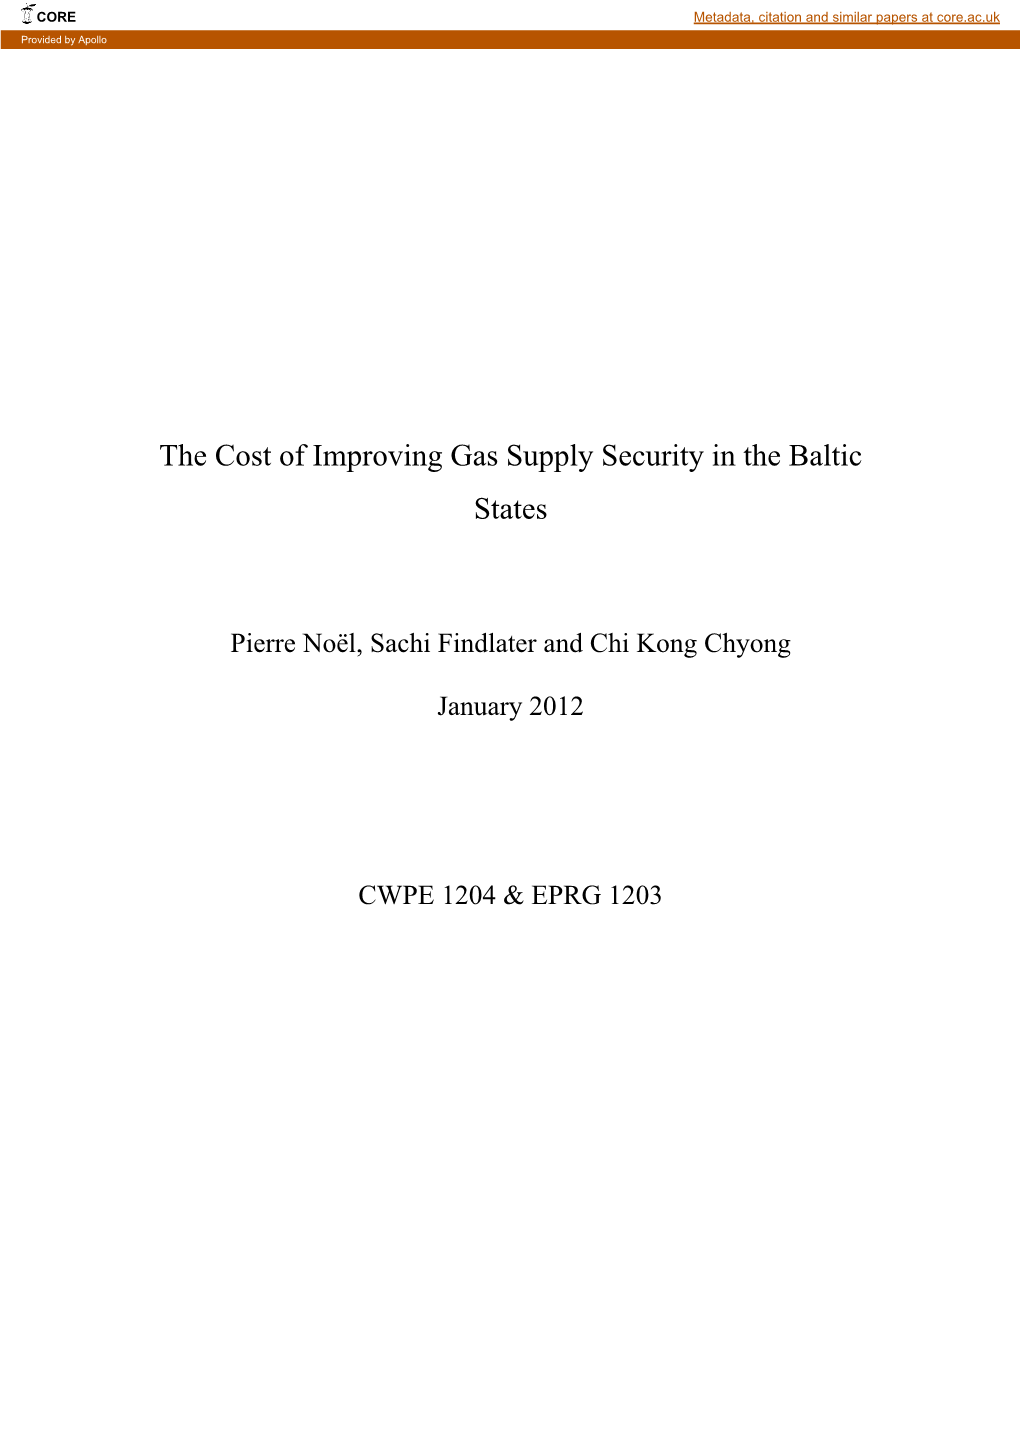 The Cost of Improving Gas Supply Security in the Baltic States